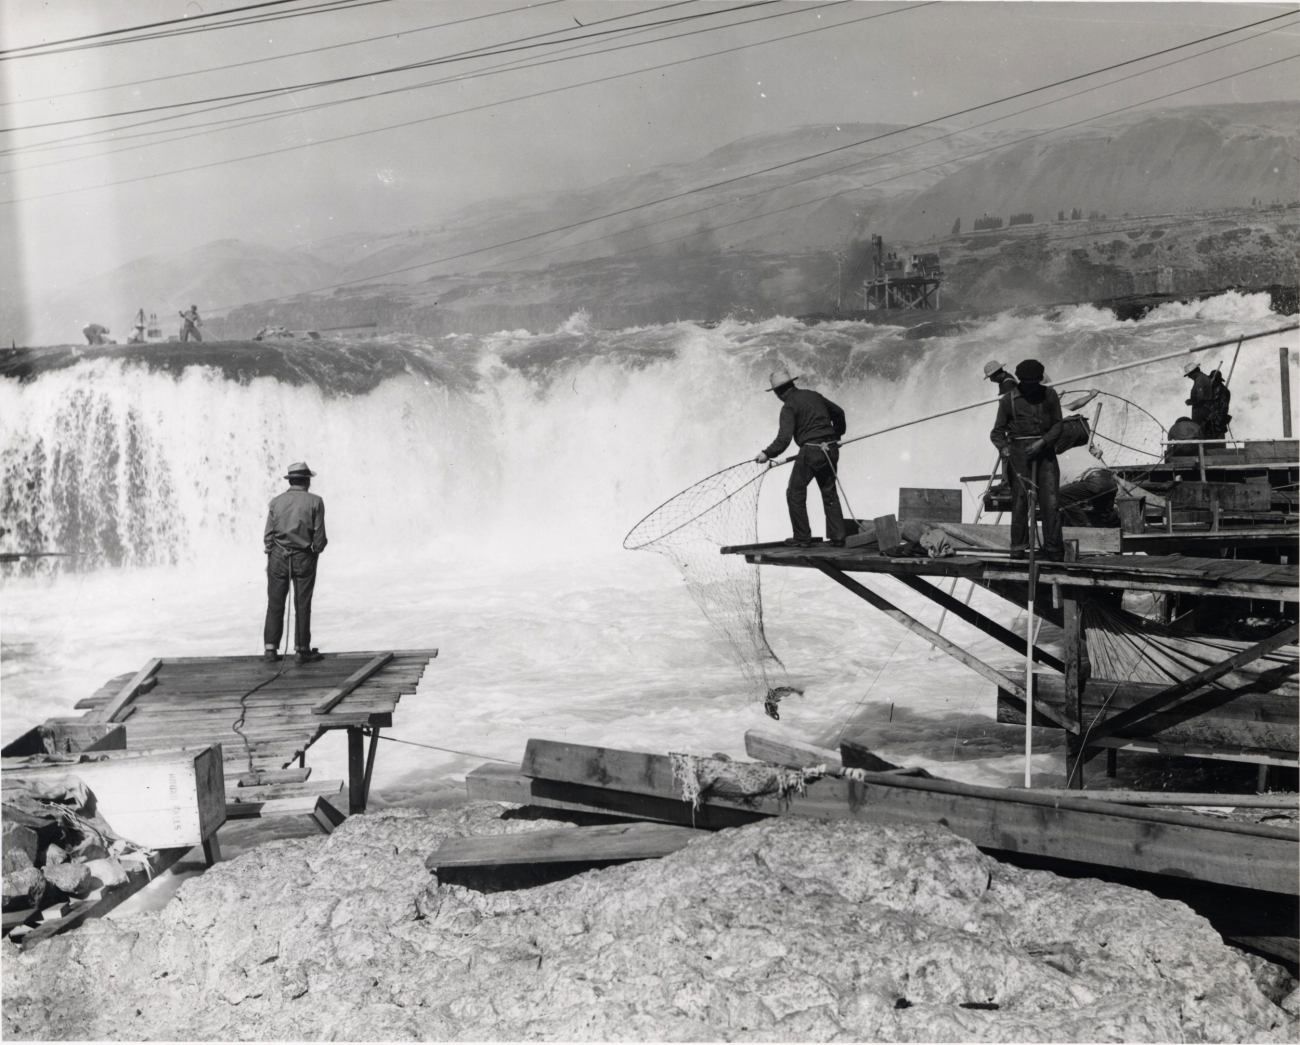 Salmon fishing with large loop nets by Indians at Celilo Falls, Oregon